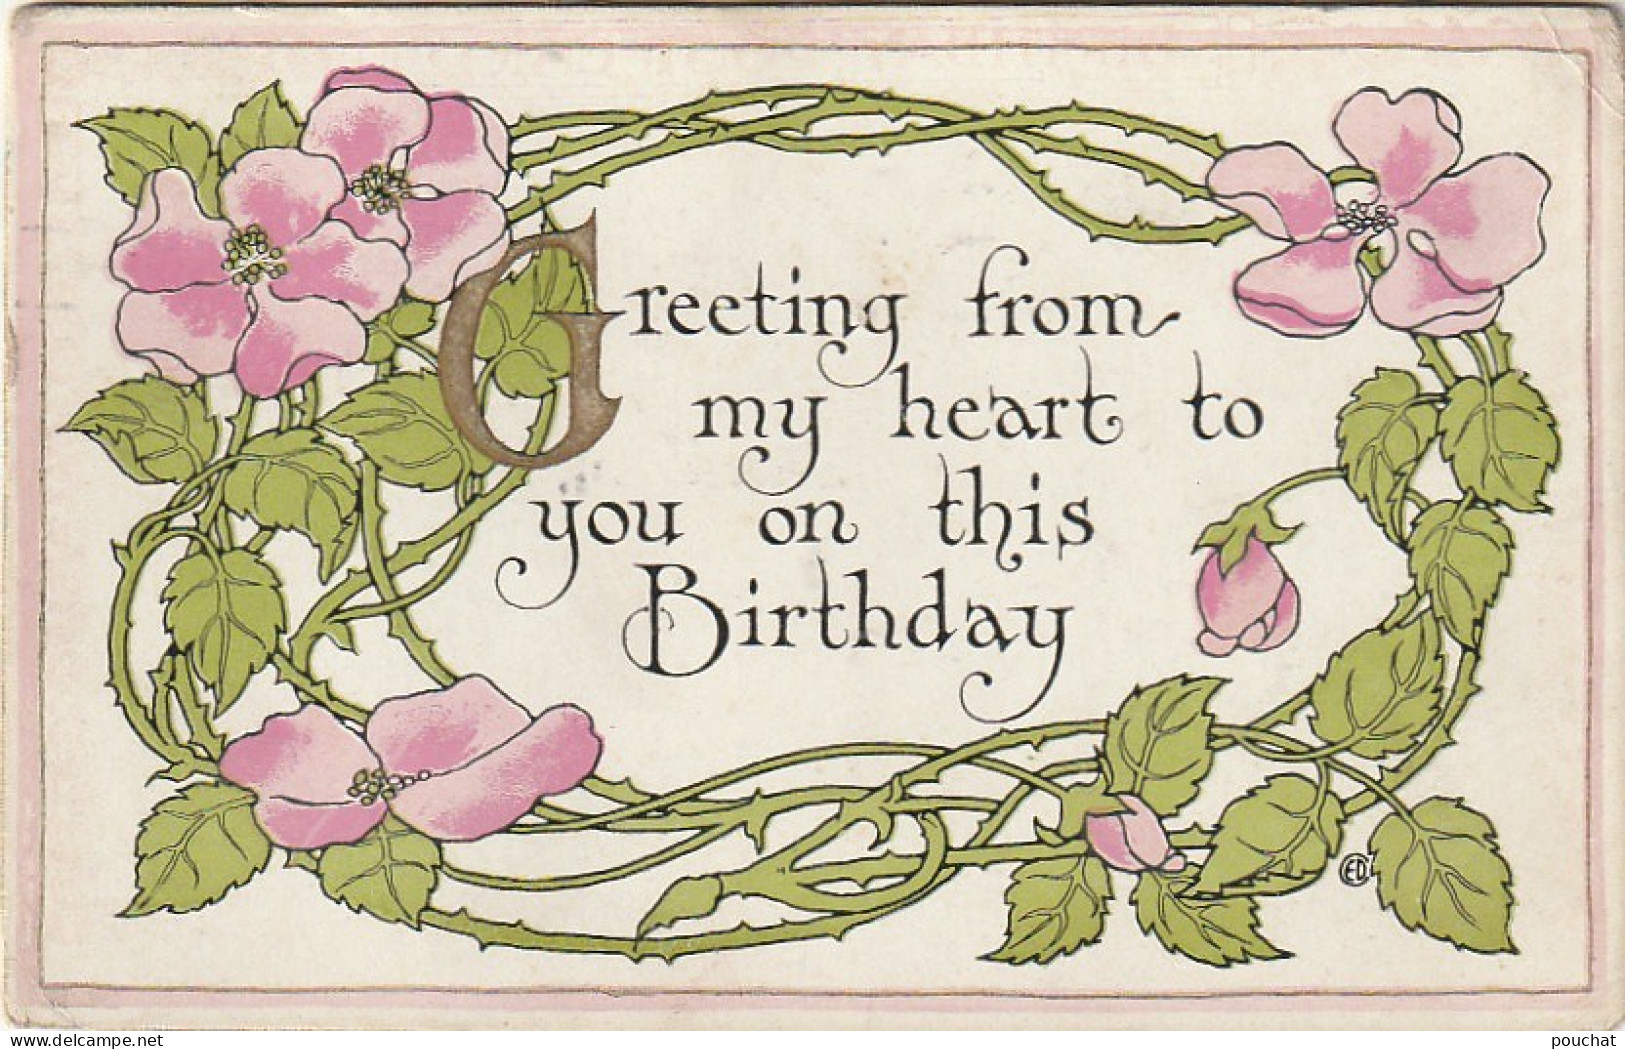 Z+ 6- " GREETING .. TO YOU ON THIS BIRTHDAY " - CARTE ANNIVERSAIRE  FANTAISIE - TIGES DE ROSES ENCHEVETREES  - 2 SCANS - Anniversaire